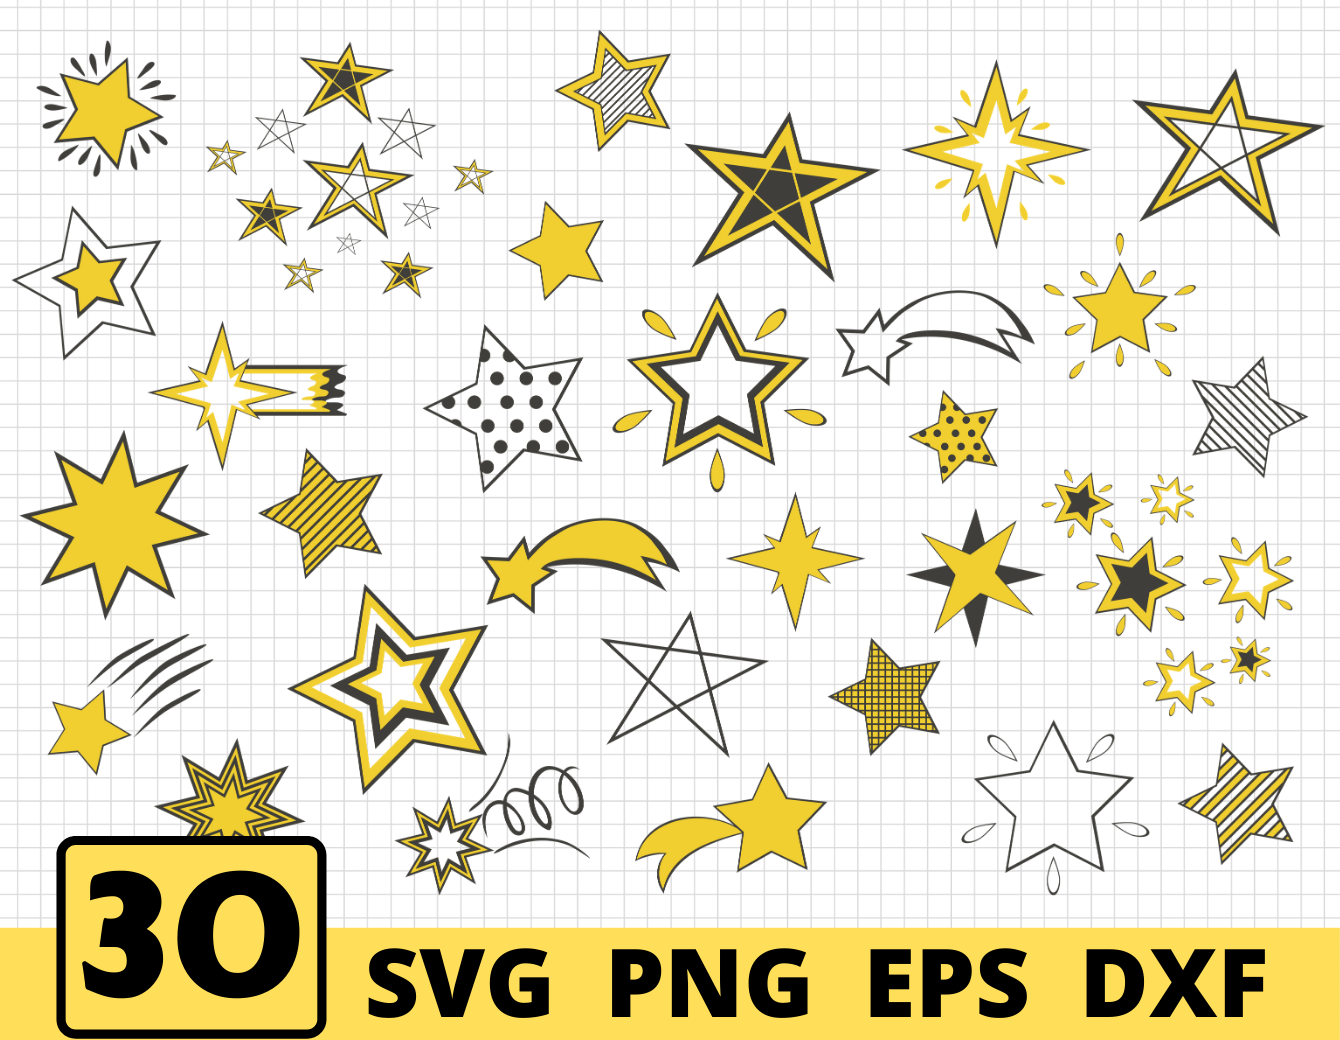 Png File 20 x Star Elements SVG & DXF Clipart Cute Stars png Star ...